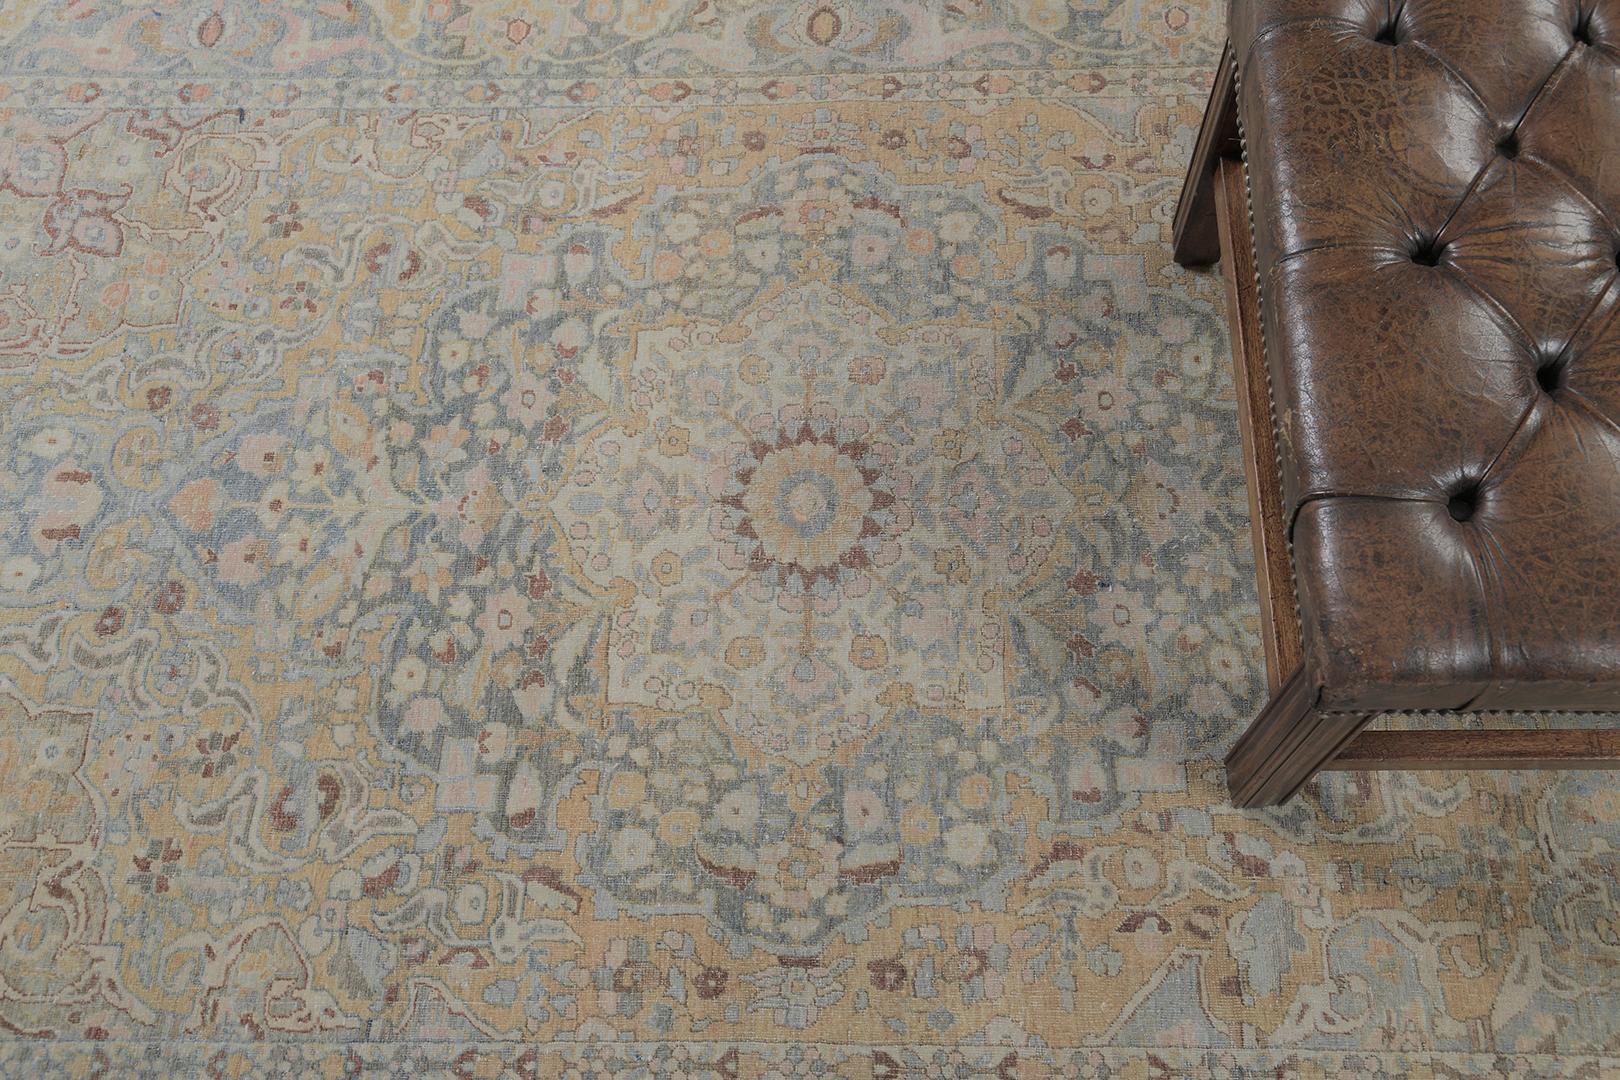 A fascinating Antique Persian Tabriz rug that emanates sophistication and irresistible elegance. This mesmerizing rug highlights central rosette medallion laying gracefully across a myriad of botanical composition gracefully spread all over the